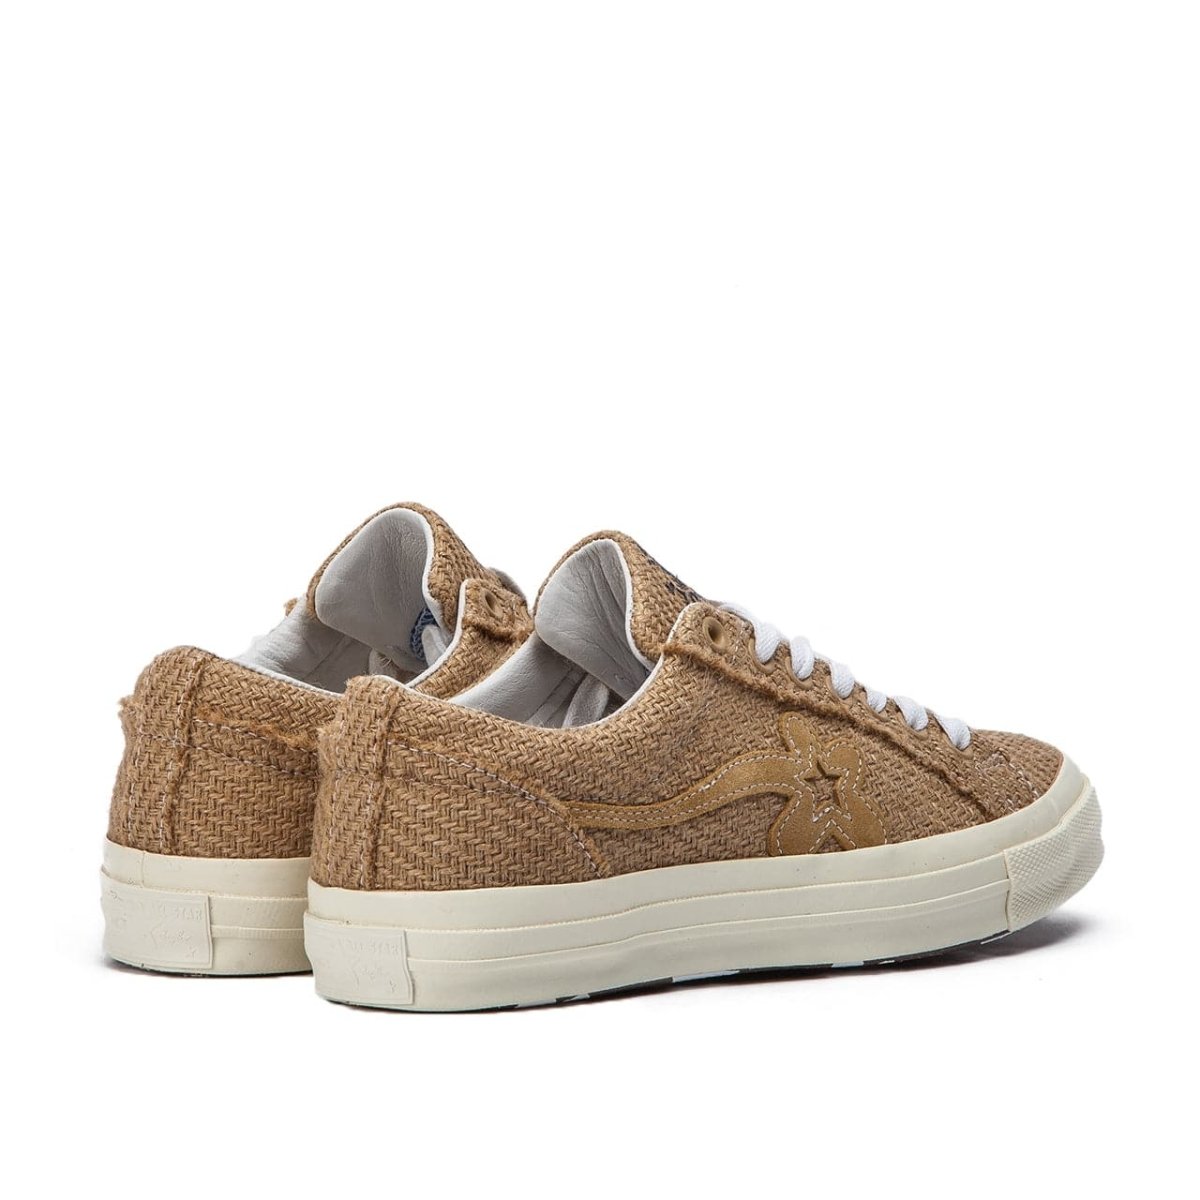 Converse x Golf Le Fleur One Star OX (Curry / Curry / Beige)  - Allike Store